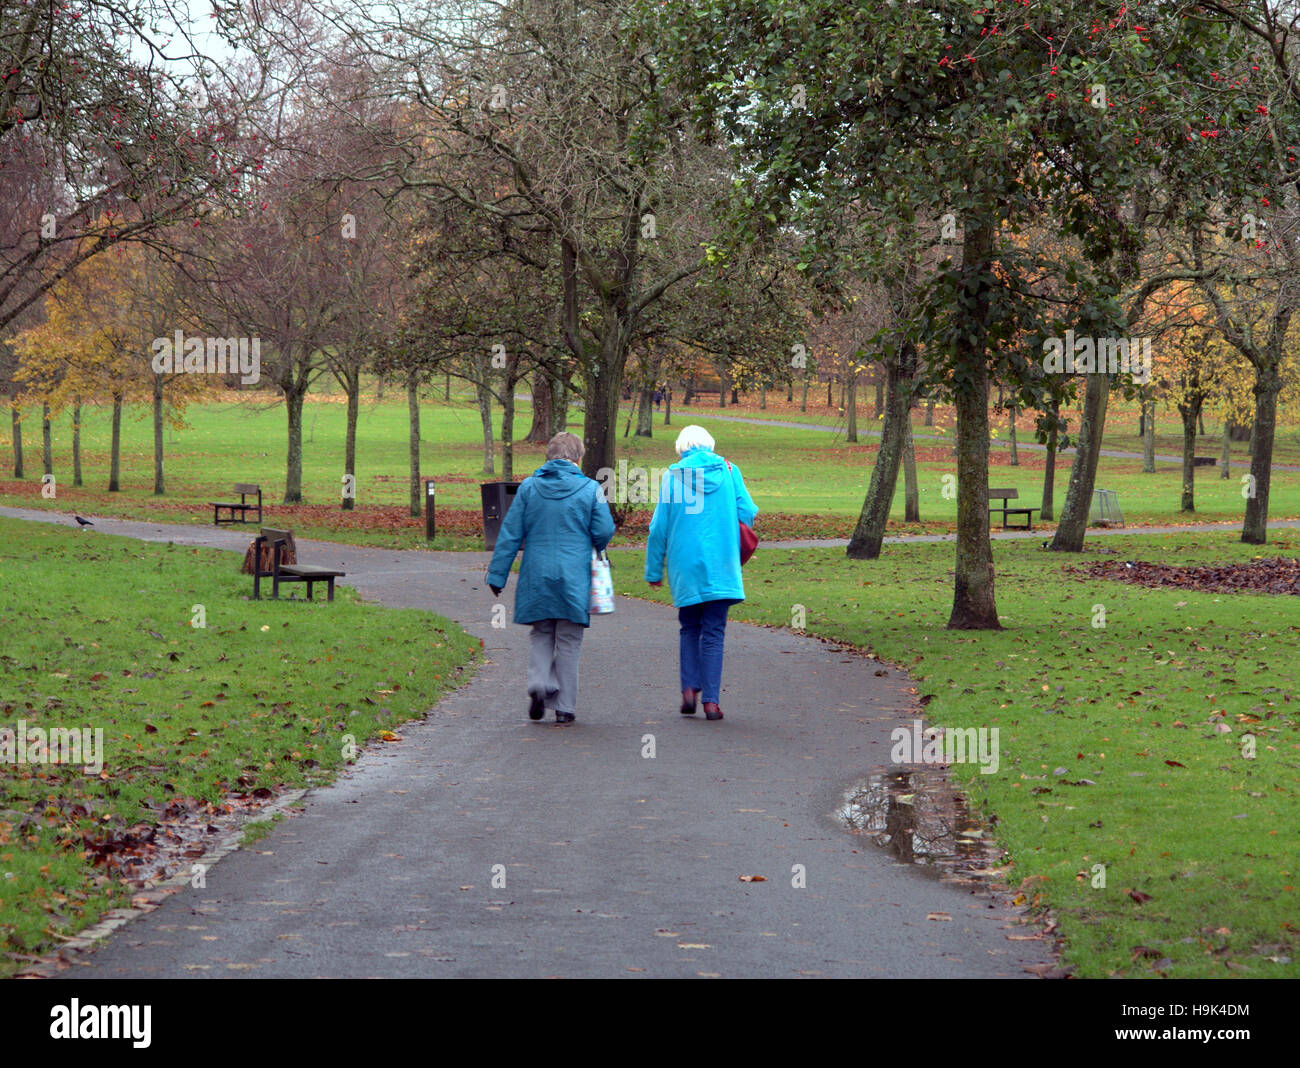 Glasgow park scene two old ladies walking on the path or road Stock Photo